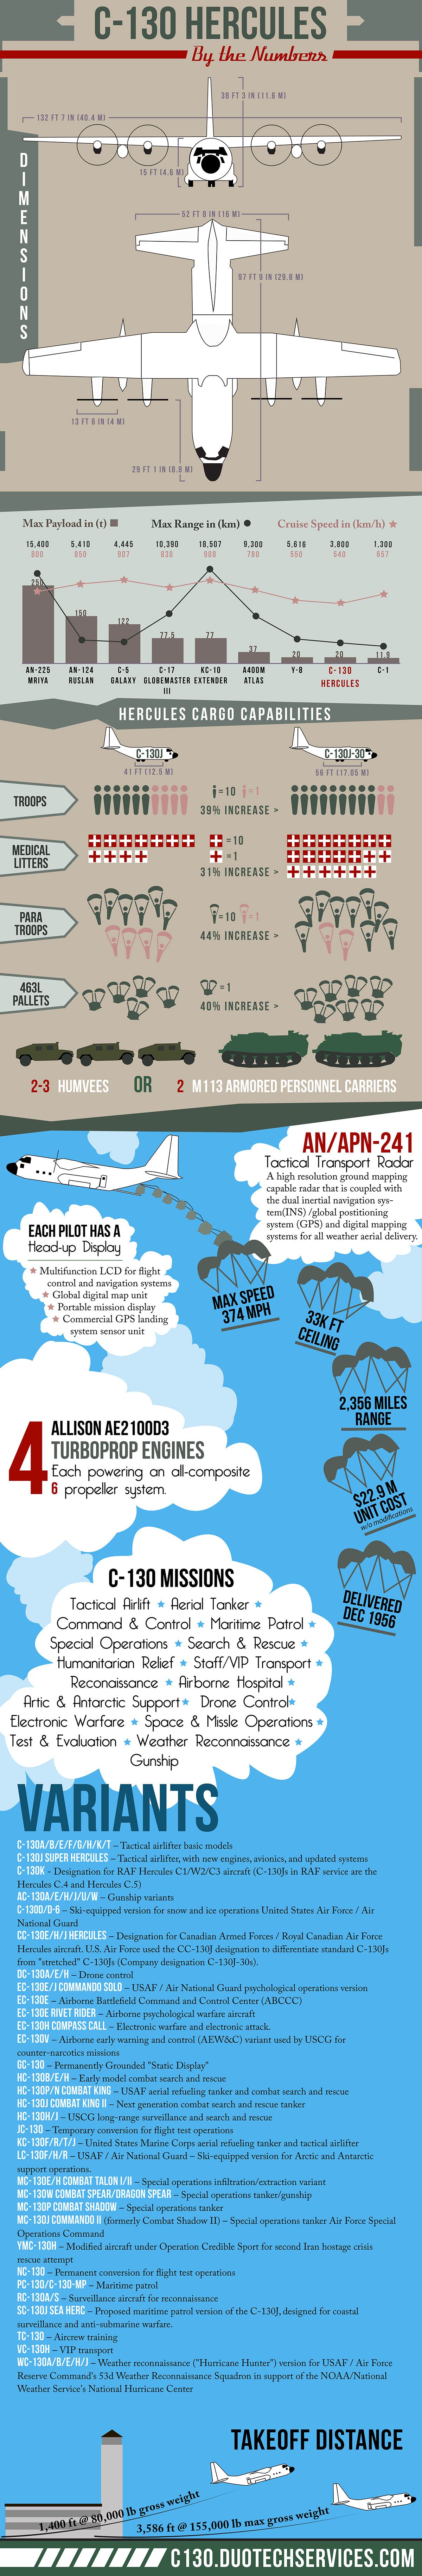 C-130 Hercules Facts Infographic